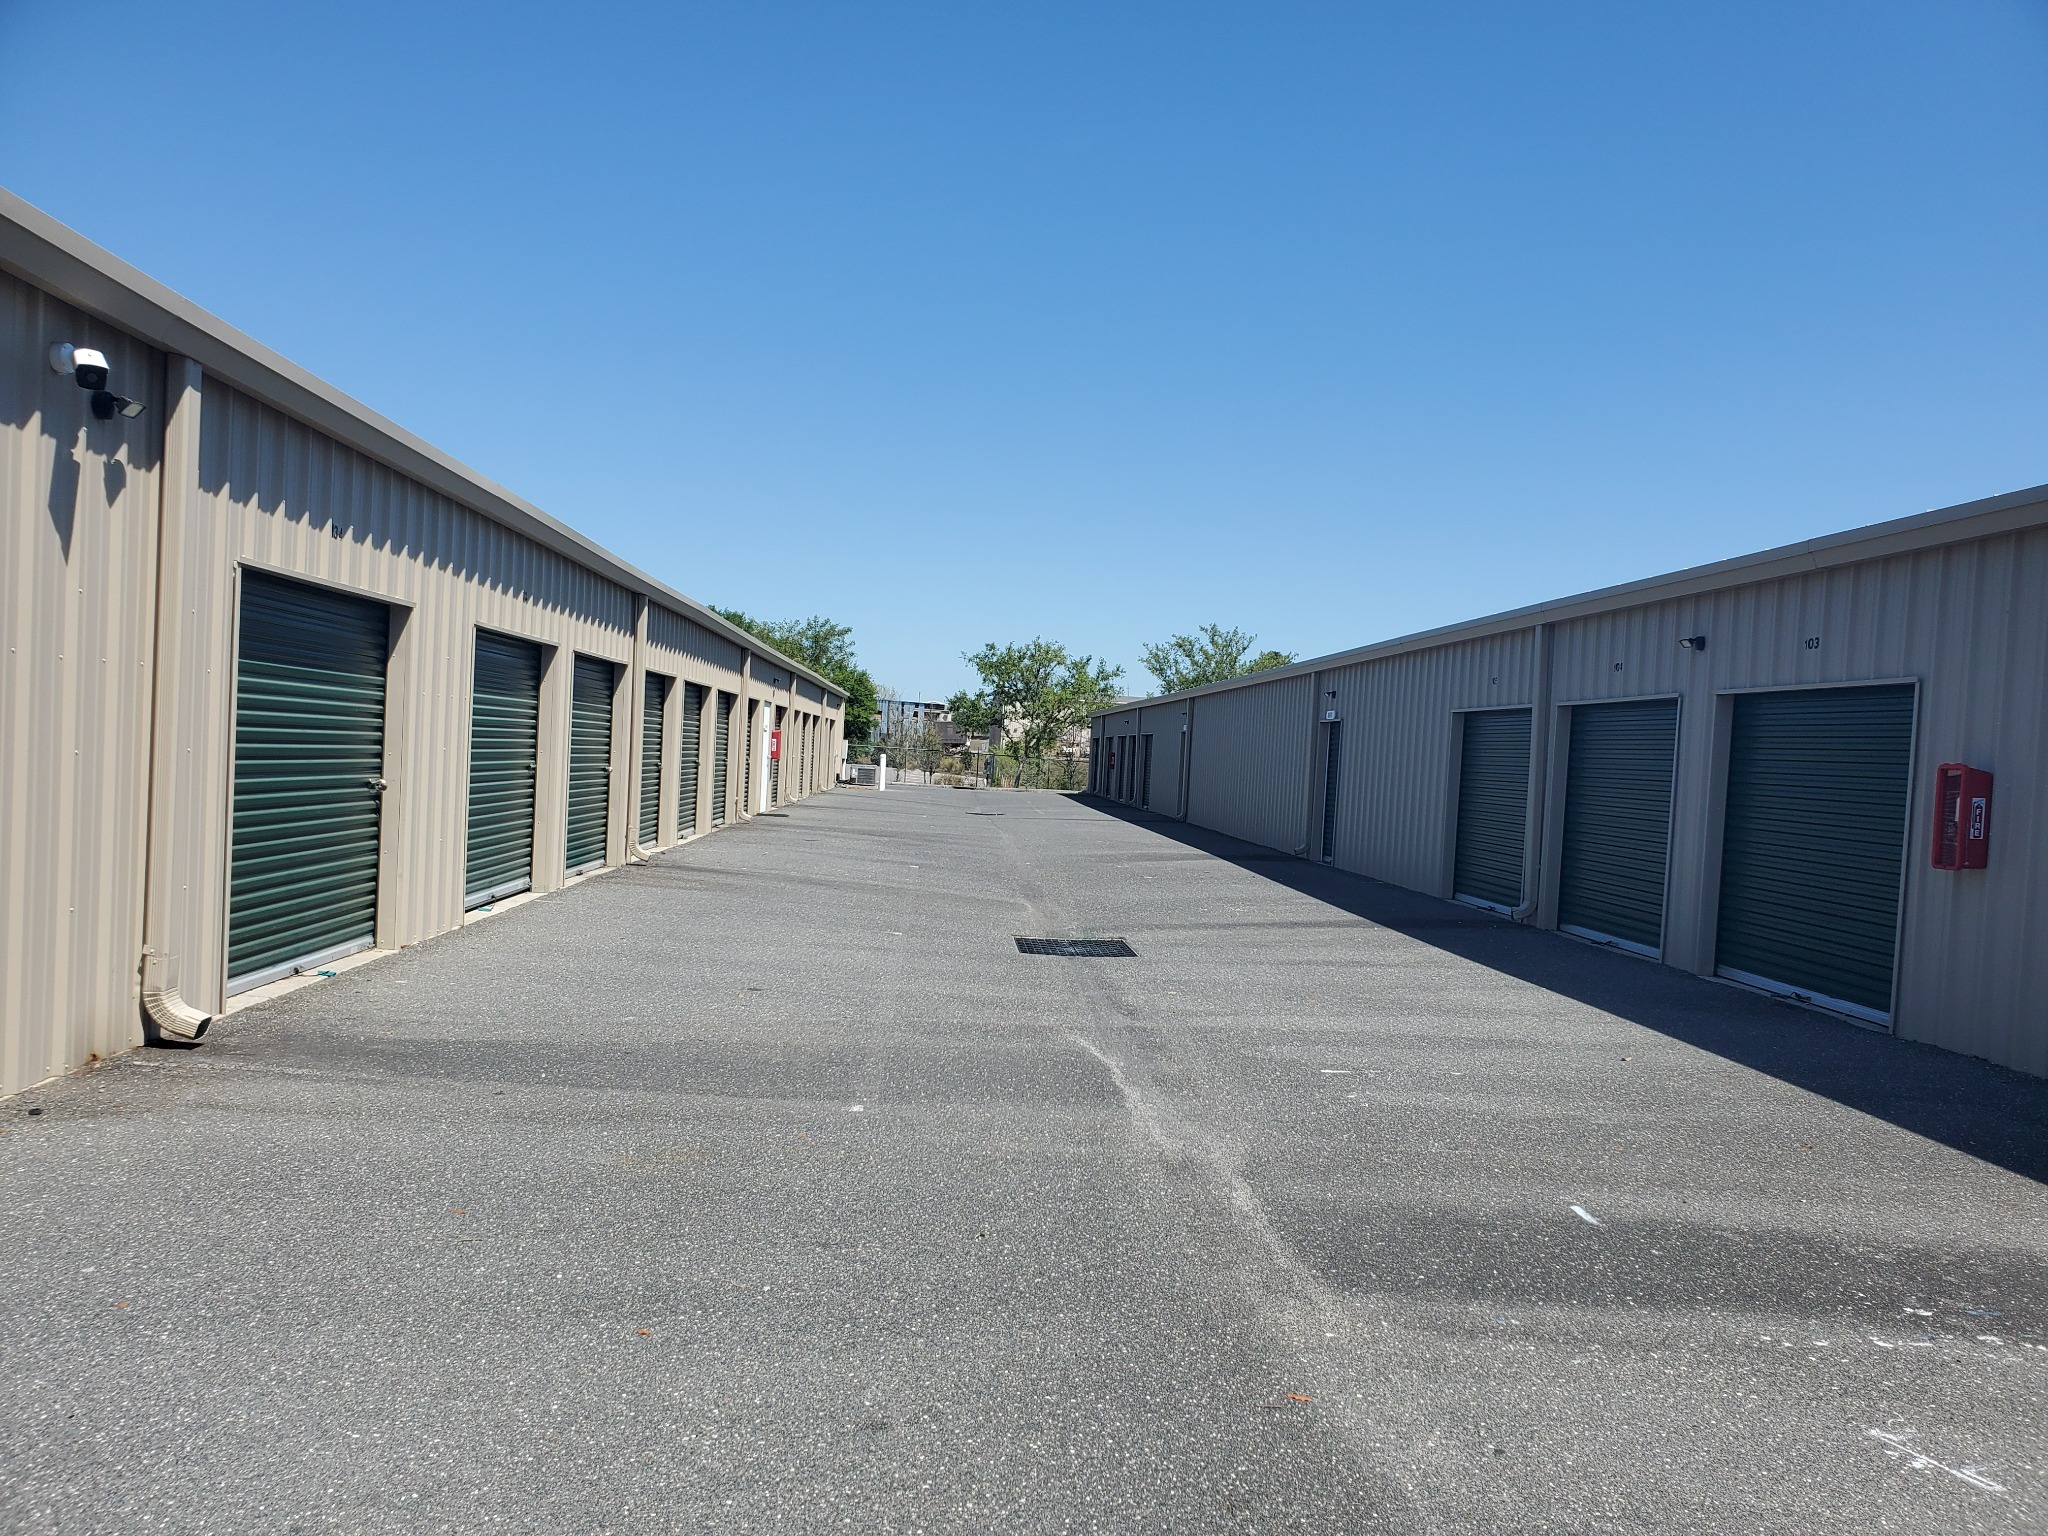 Fort Knox Self Storage - Rolling Acres Road - Photo 3